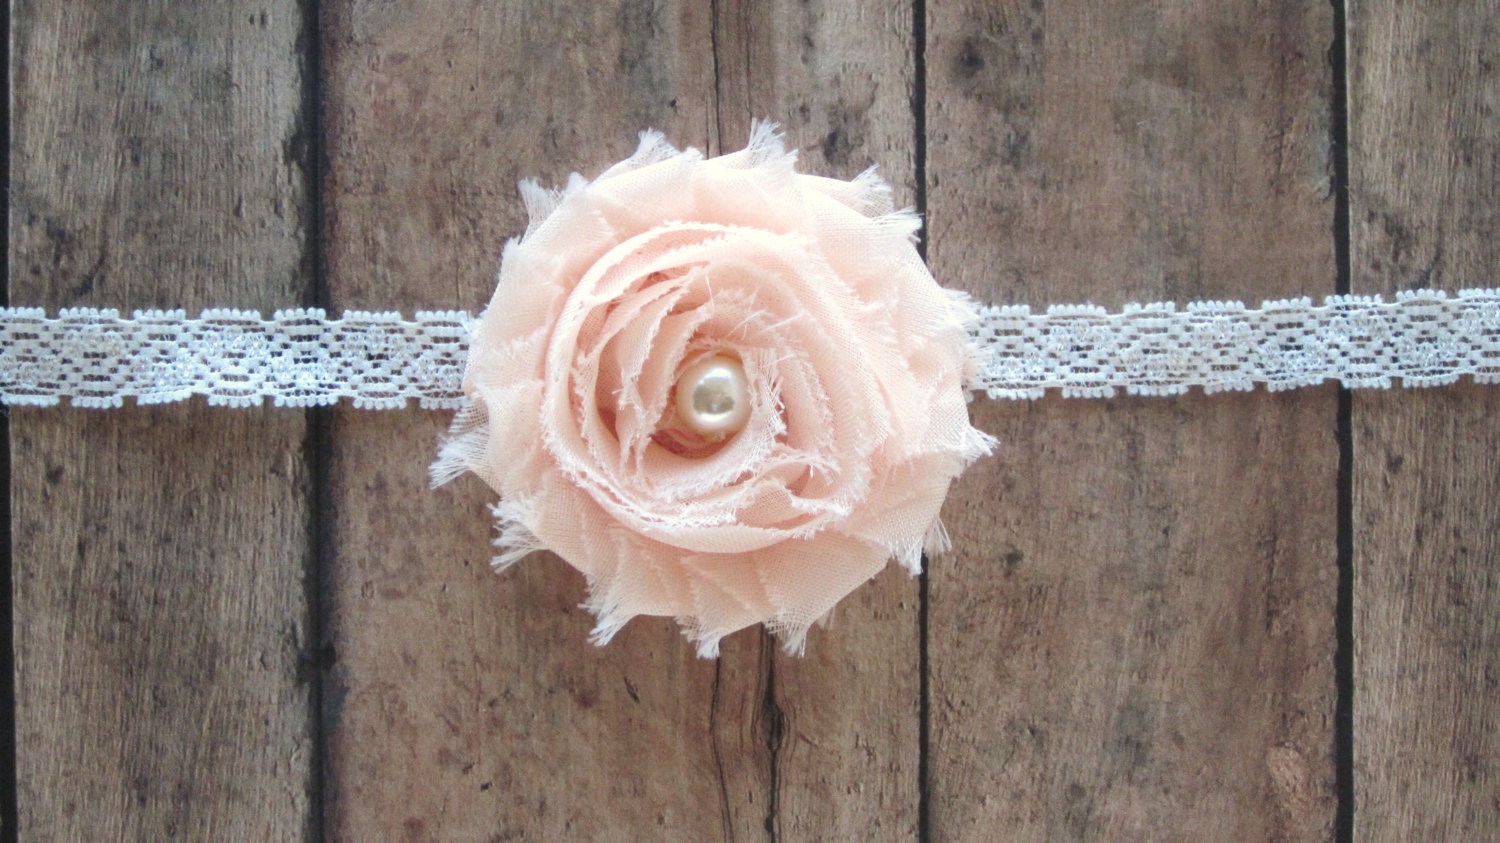 Pale Coral Shabby Chic Chiffon Newborn Headband, Baby Headband,Toddler Hair Clip, Girls Hair Clip, Teen and Adult Hair Clip, Photo Prop! - CappyClips